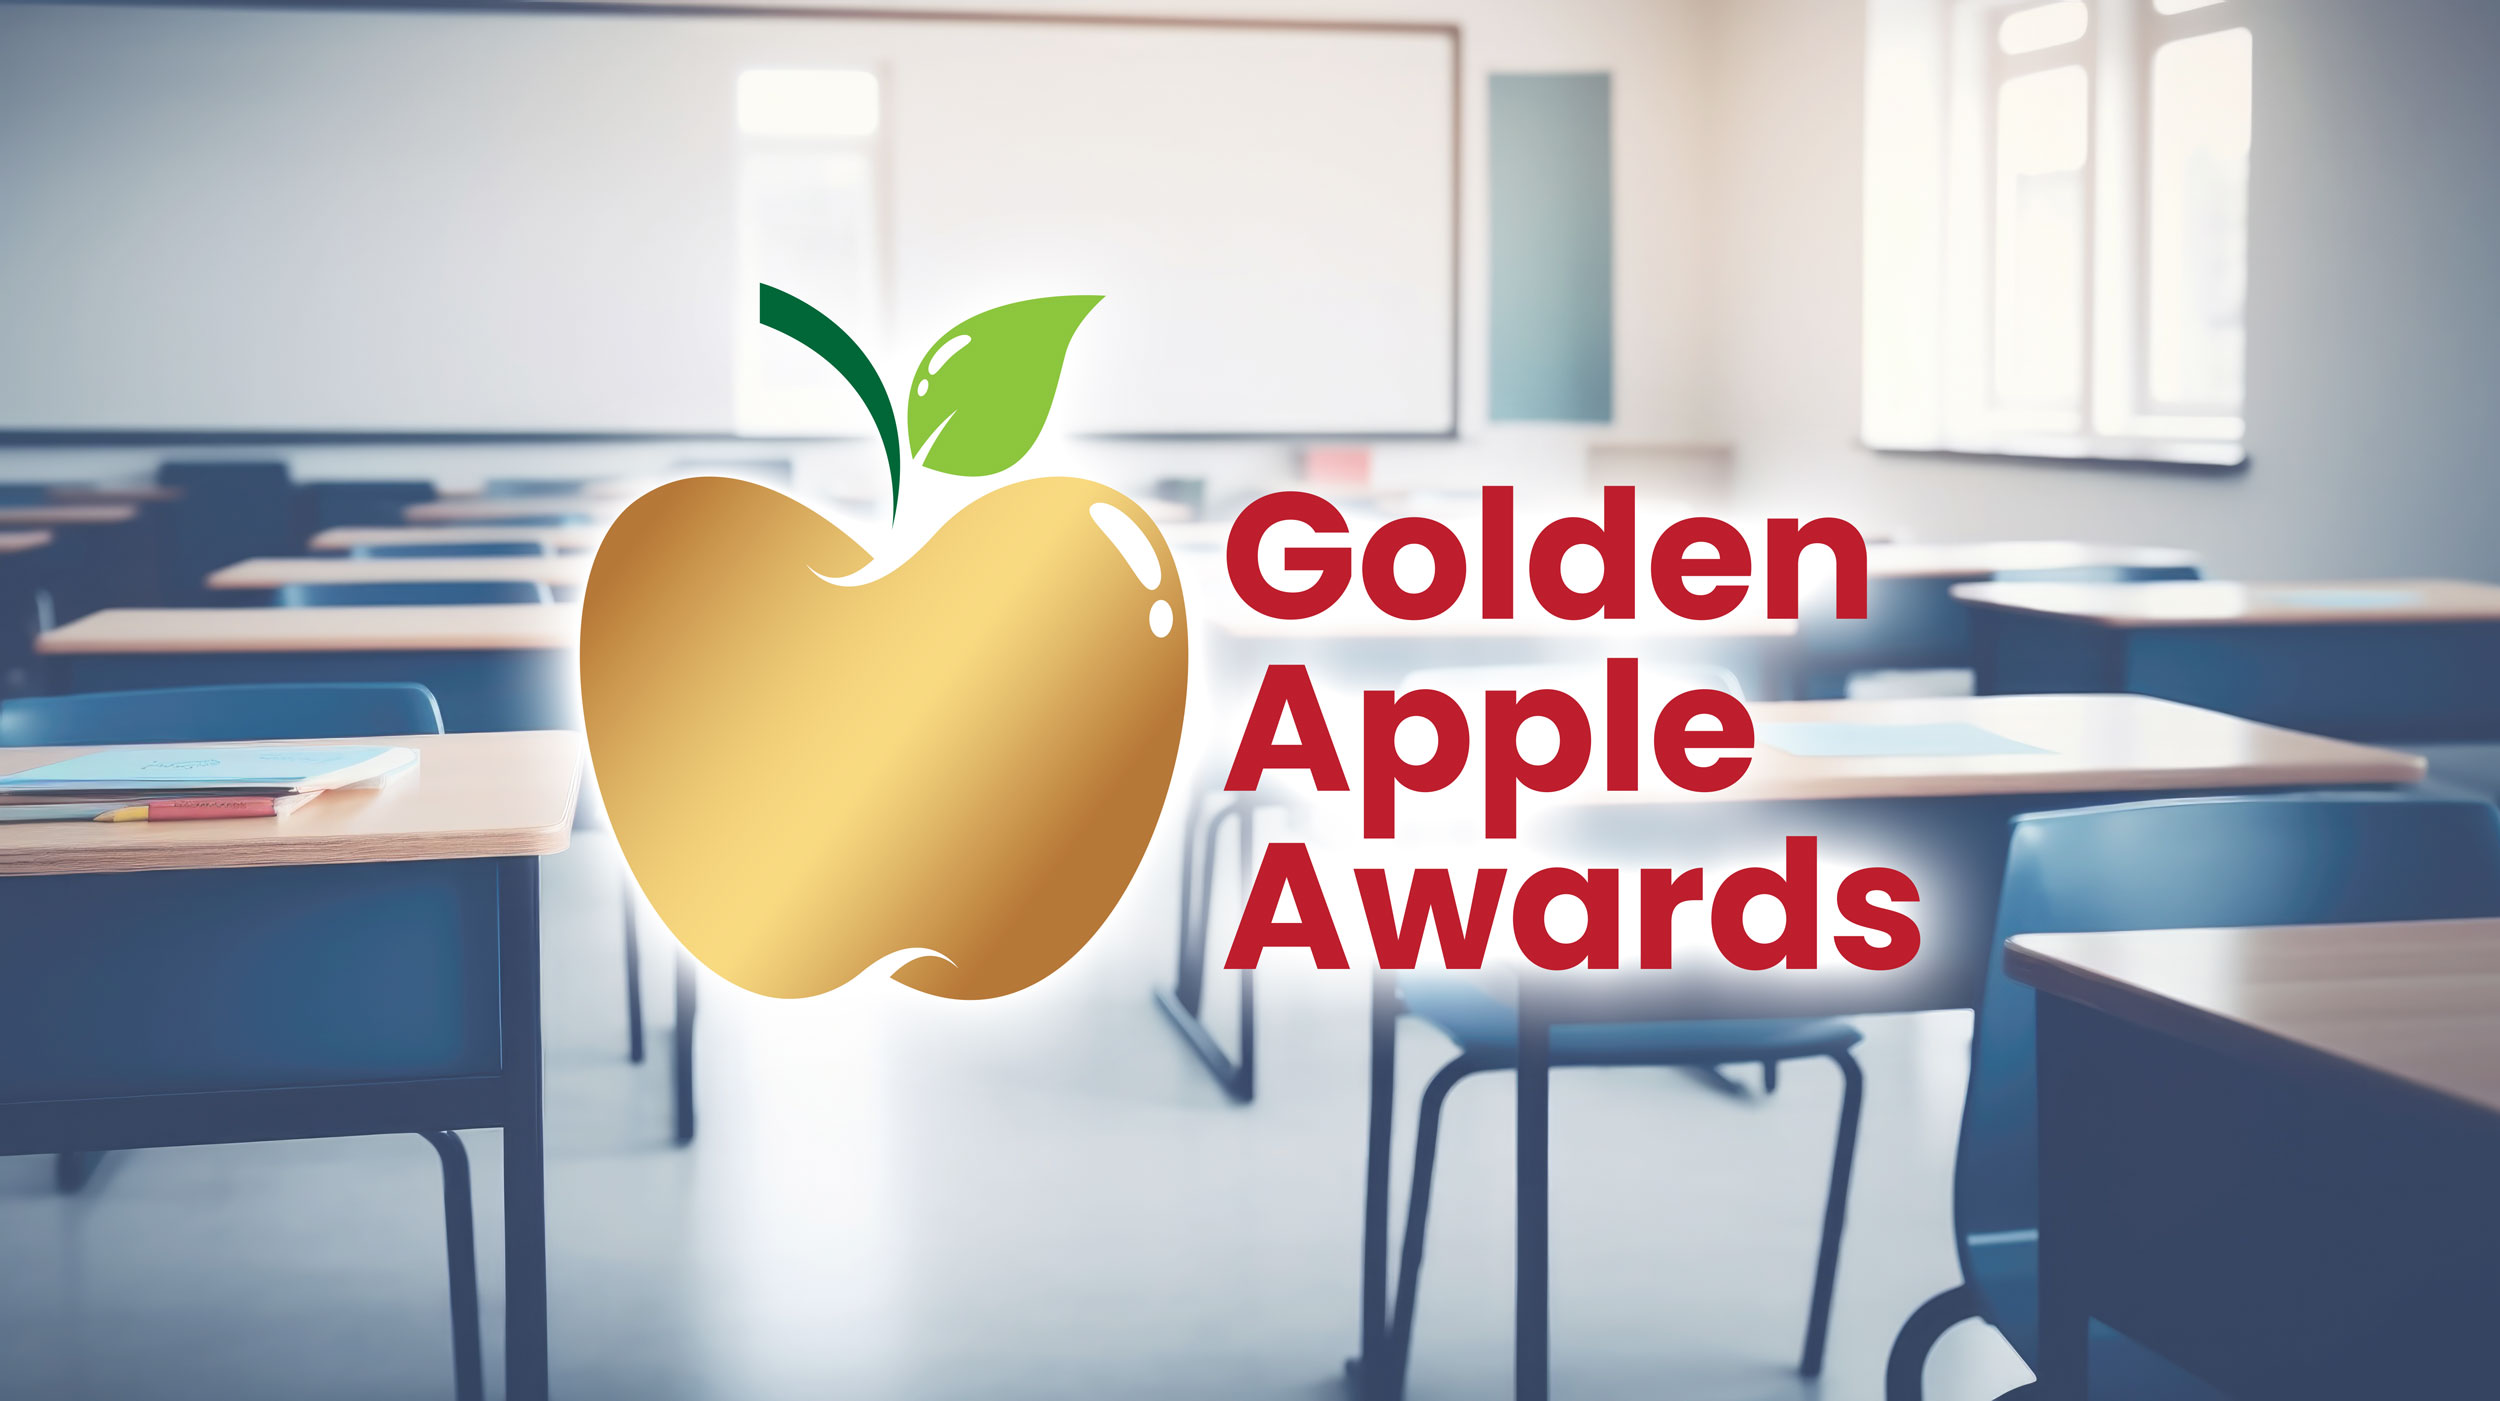 Nominate an Educator for The Golden Apple Awards